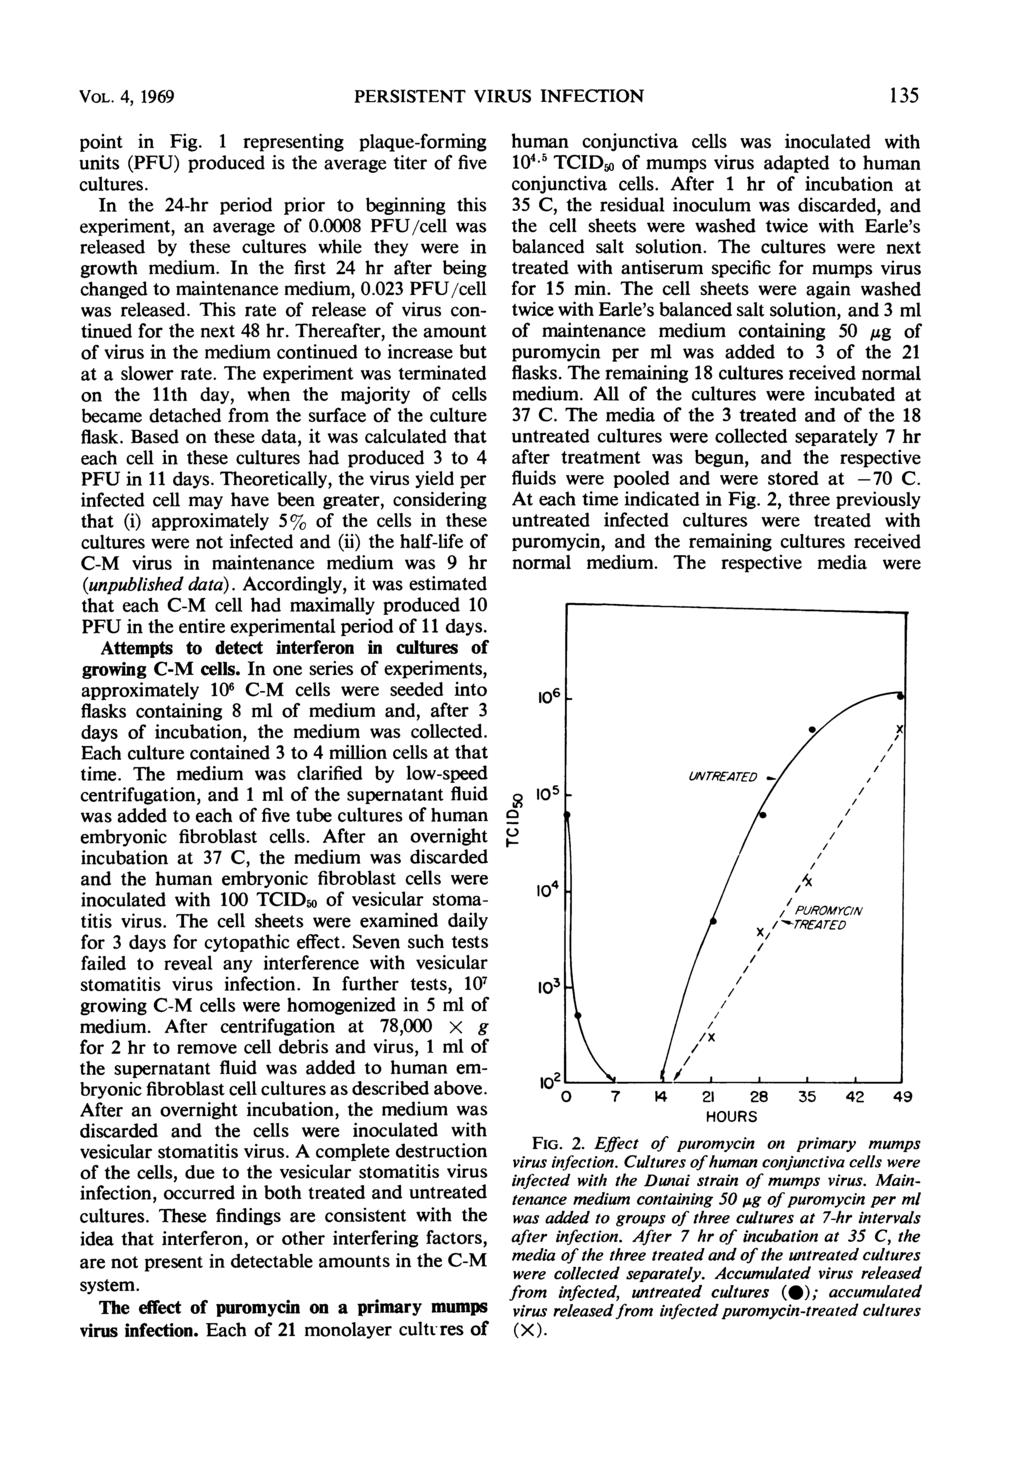 VOL. 4, 1969 PERSISTENT VIRUS INFECTION point in Fig. 1 representing plaque-forming units (PFU) produced is the average titer of five cultures.